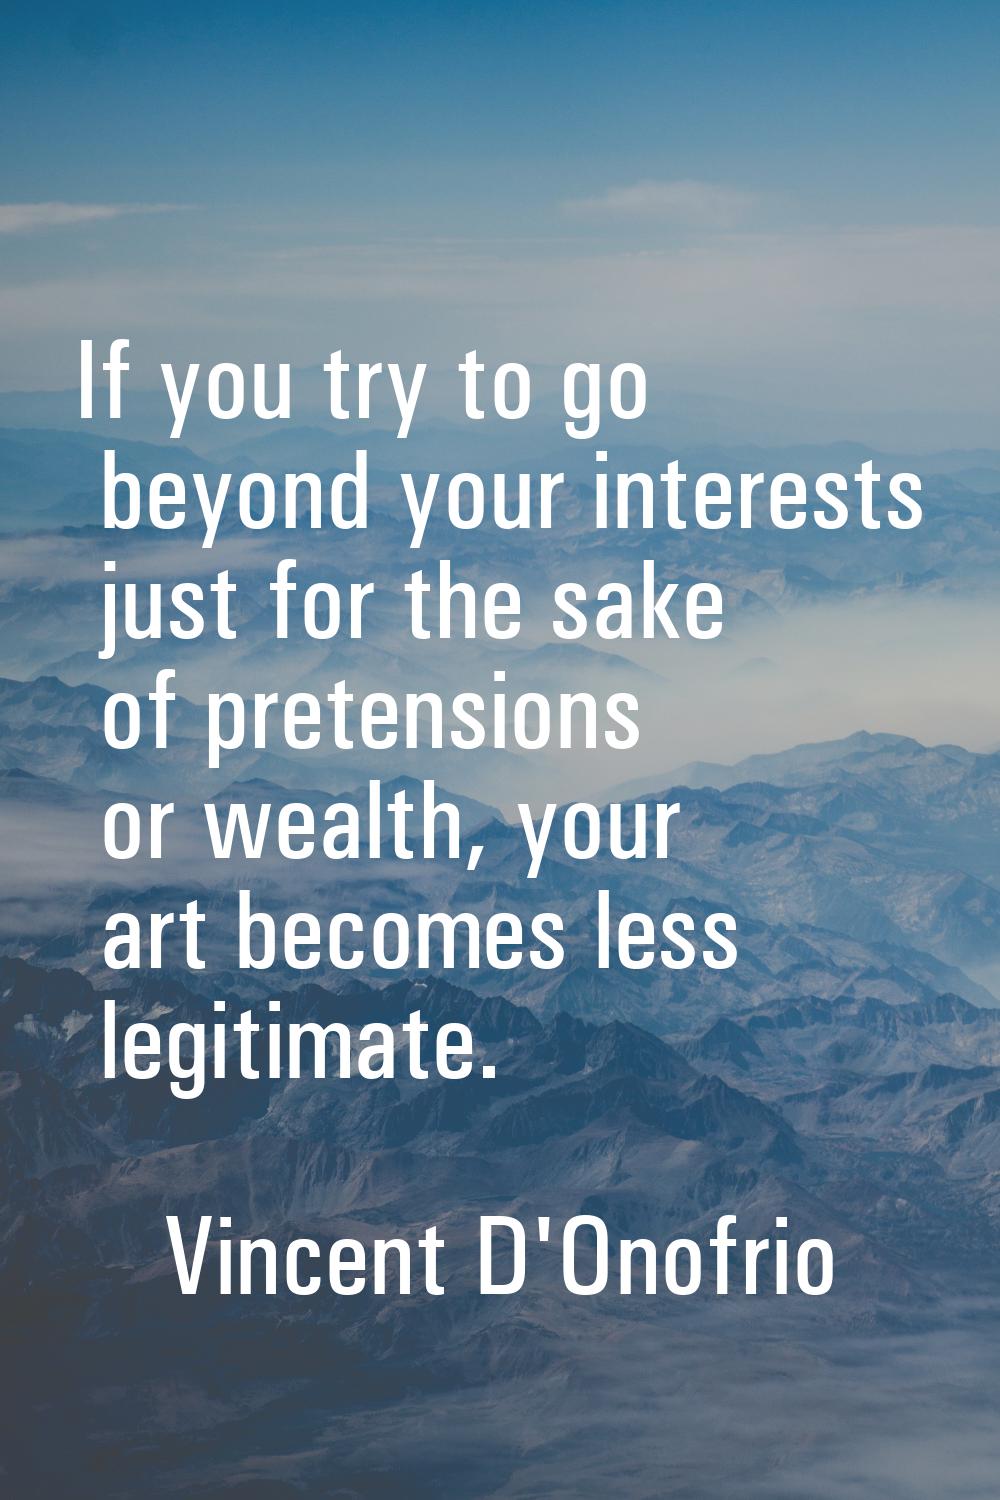 If you try to go beyond your interests just for the sake of pretensions or wealth, your art becomes